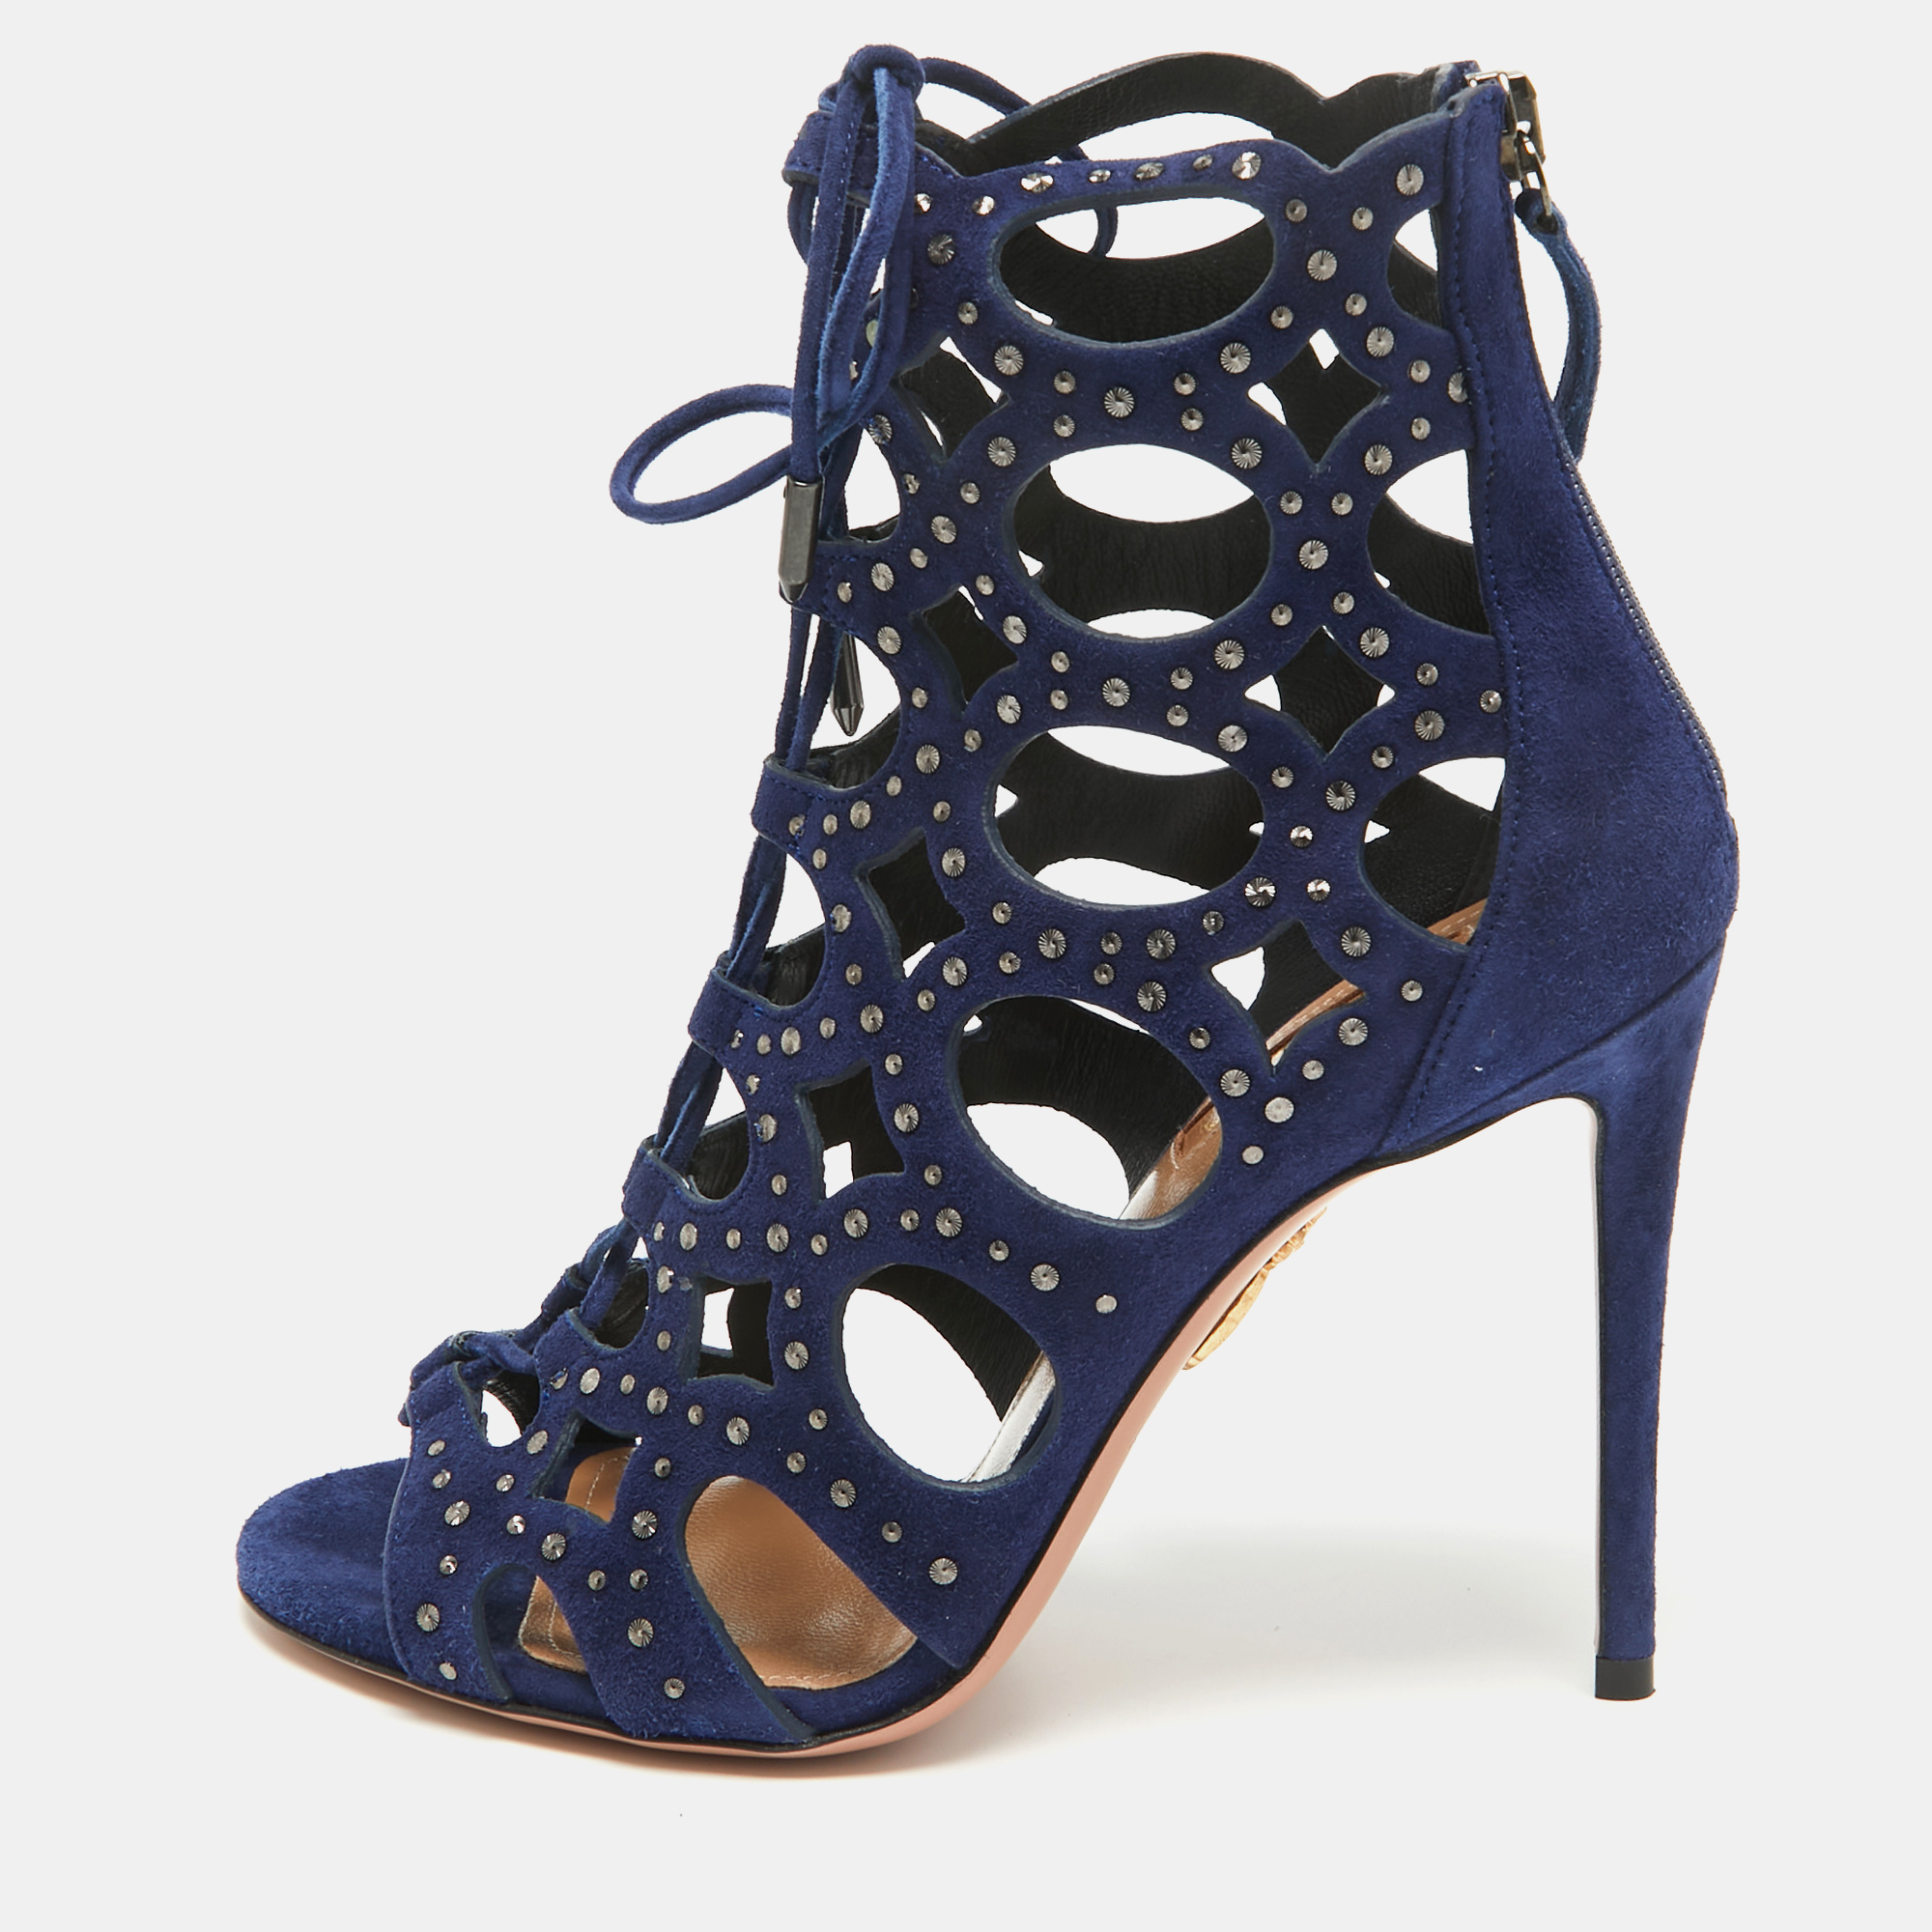 Pre-owned Aquazzura Blue Suede Begum Studded Cut Out Ankle Booties Size 37